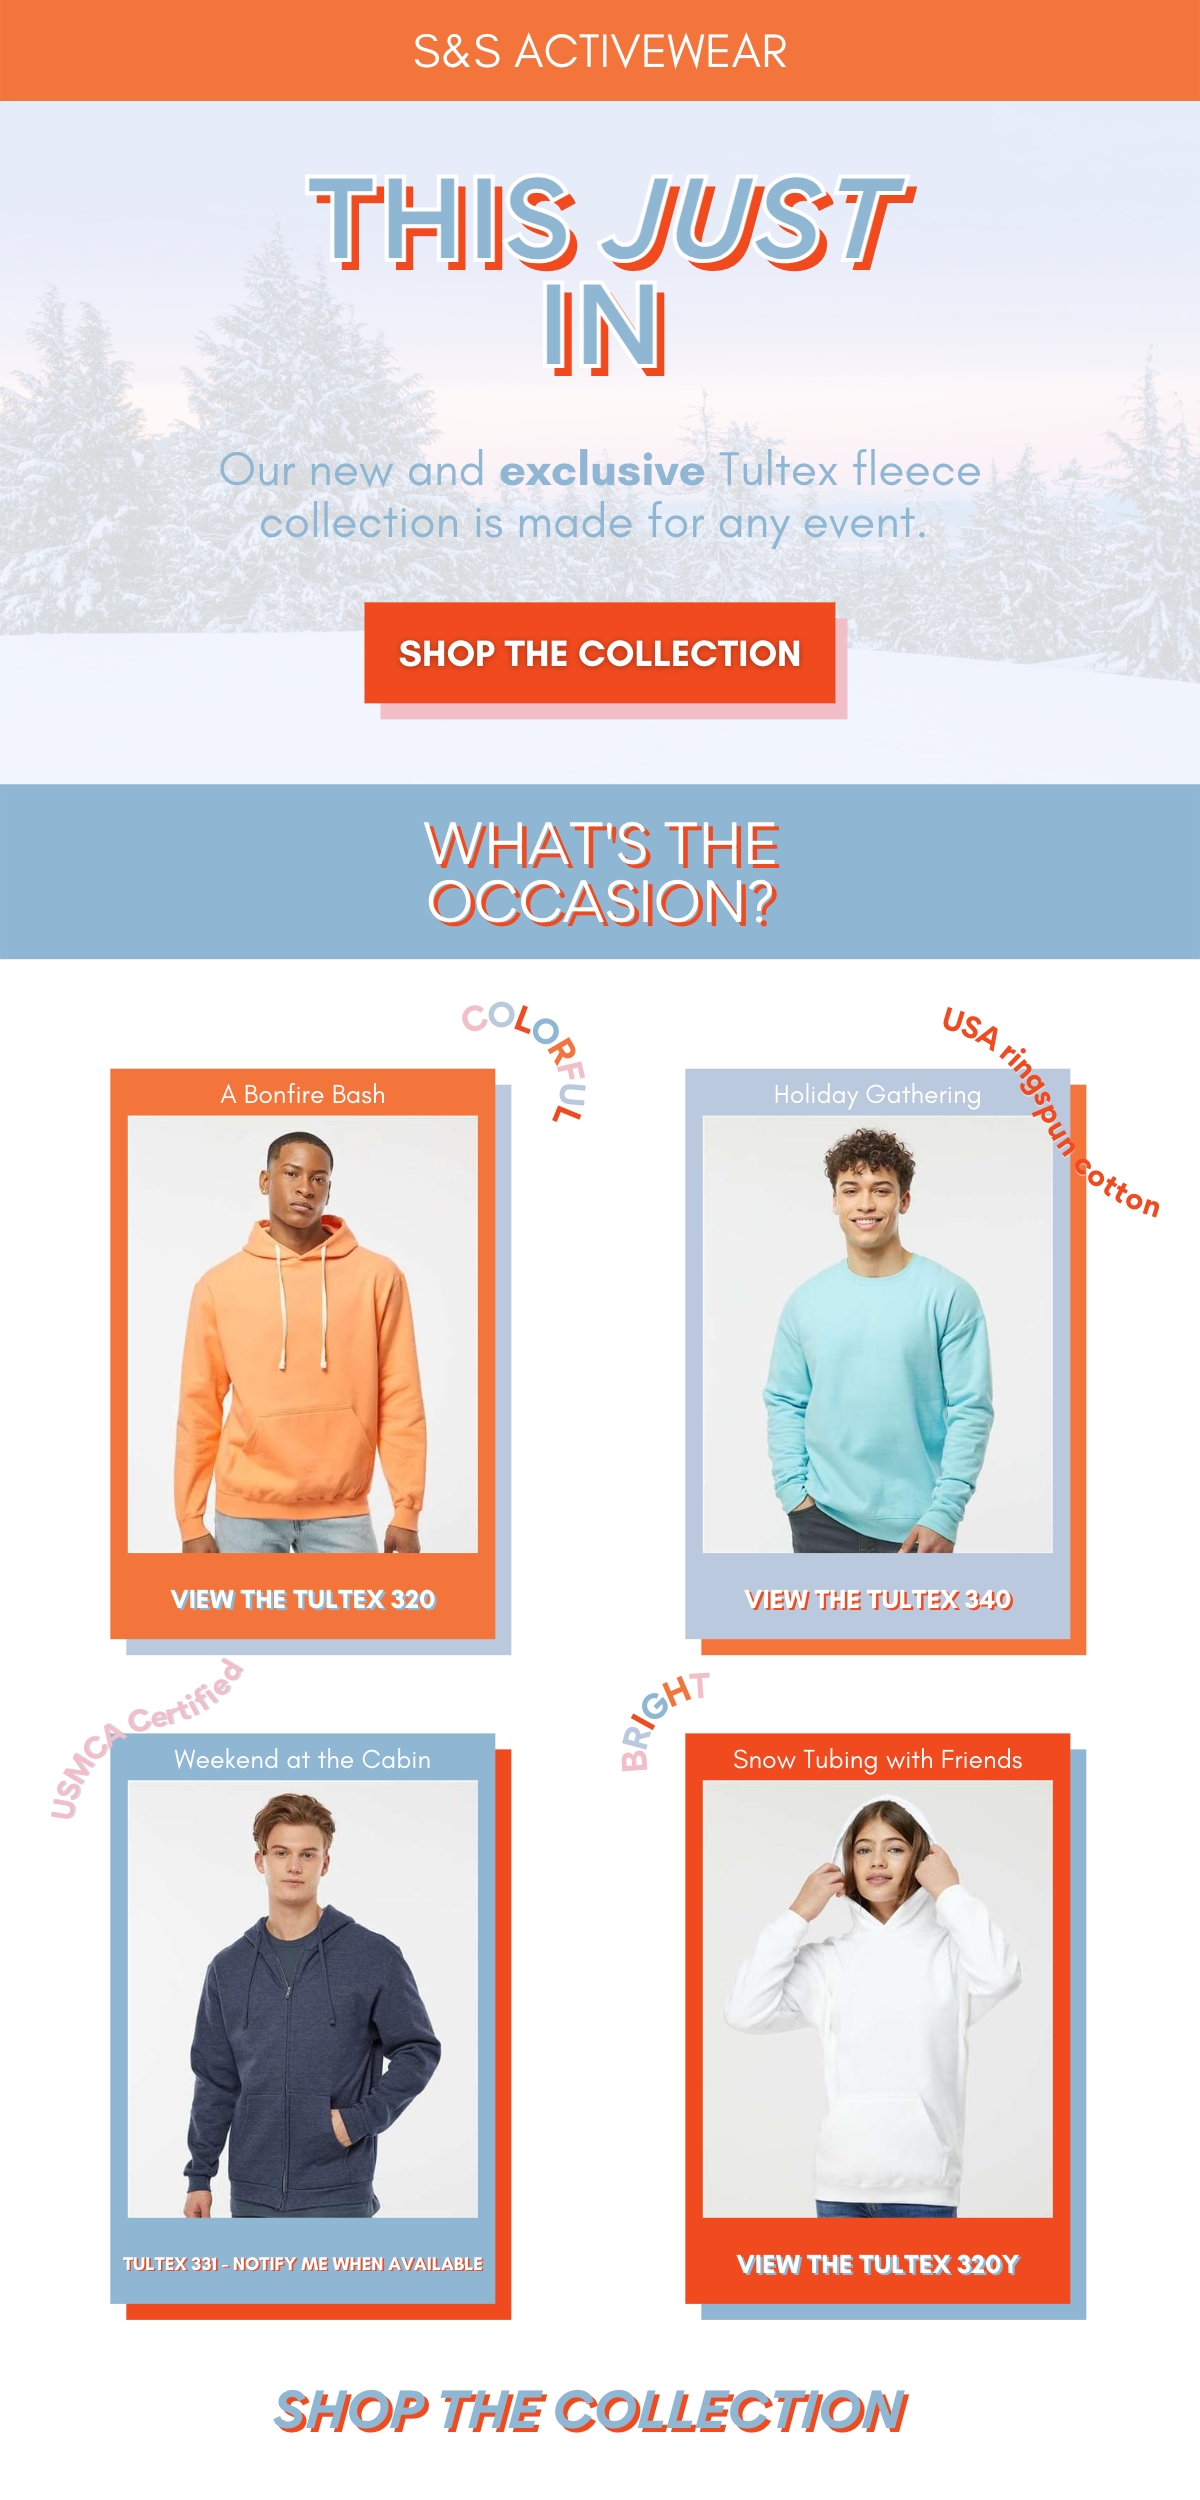 S&S Activewear Email Campaign is a modern and colorful brand project. Jennifer Lynn Design Studio focuses on brand, social media, and web design. Contact me for your next email newsletter design project.